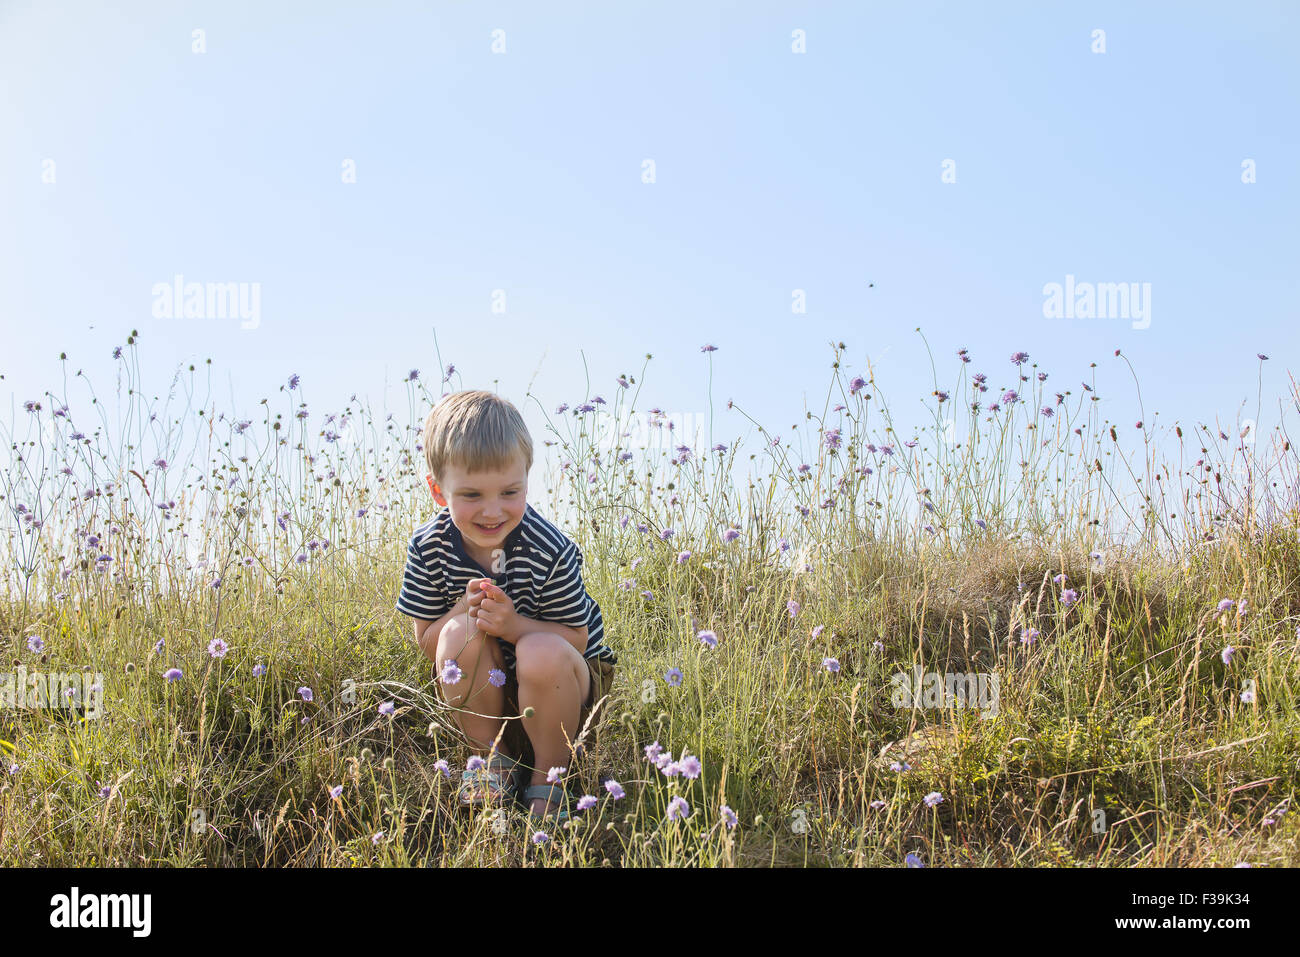 Boy sitting in green field, smiling Stock Photo